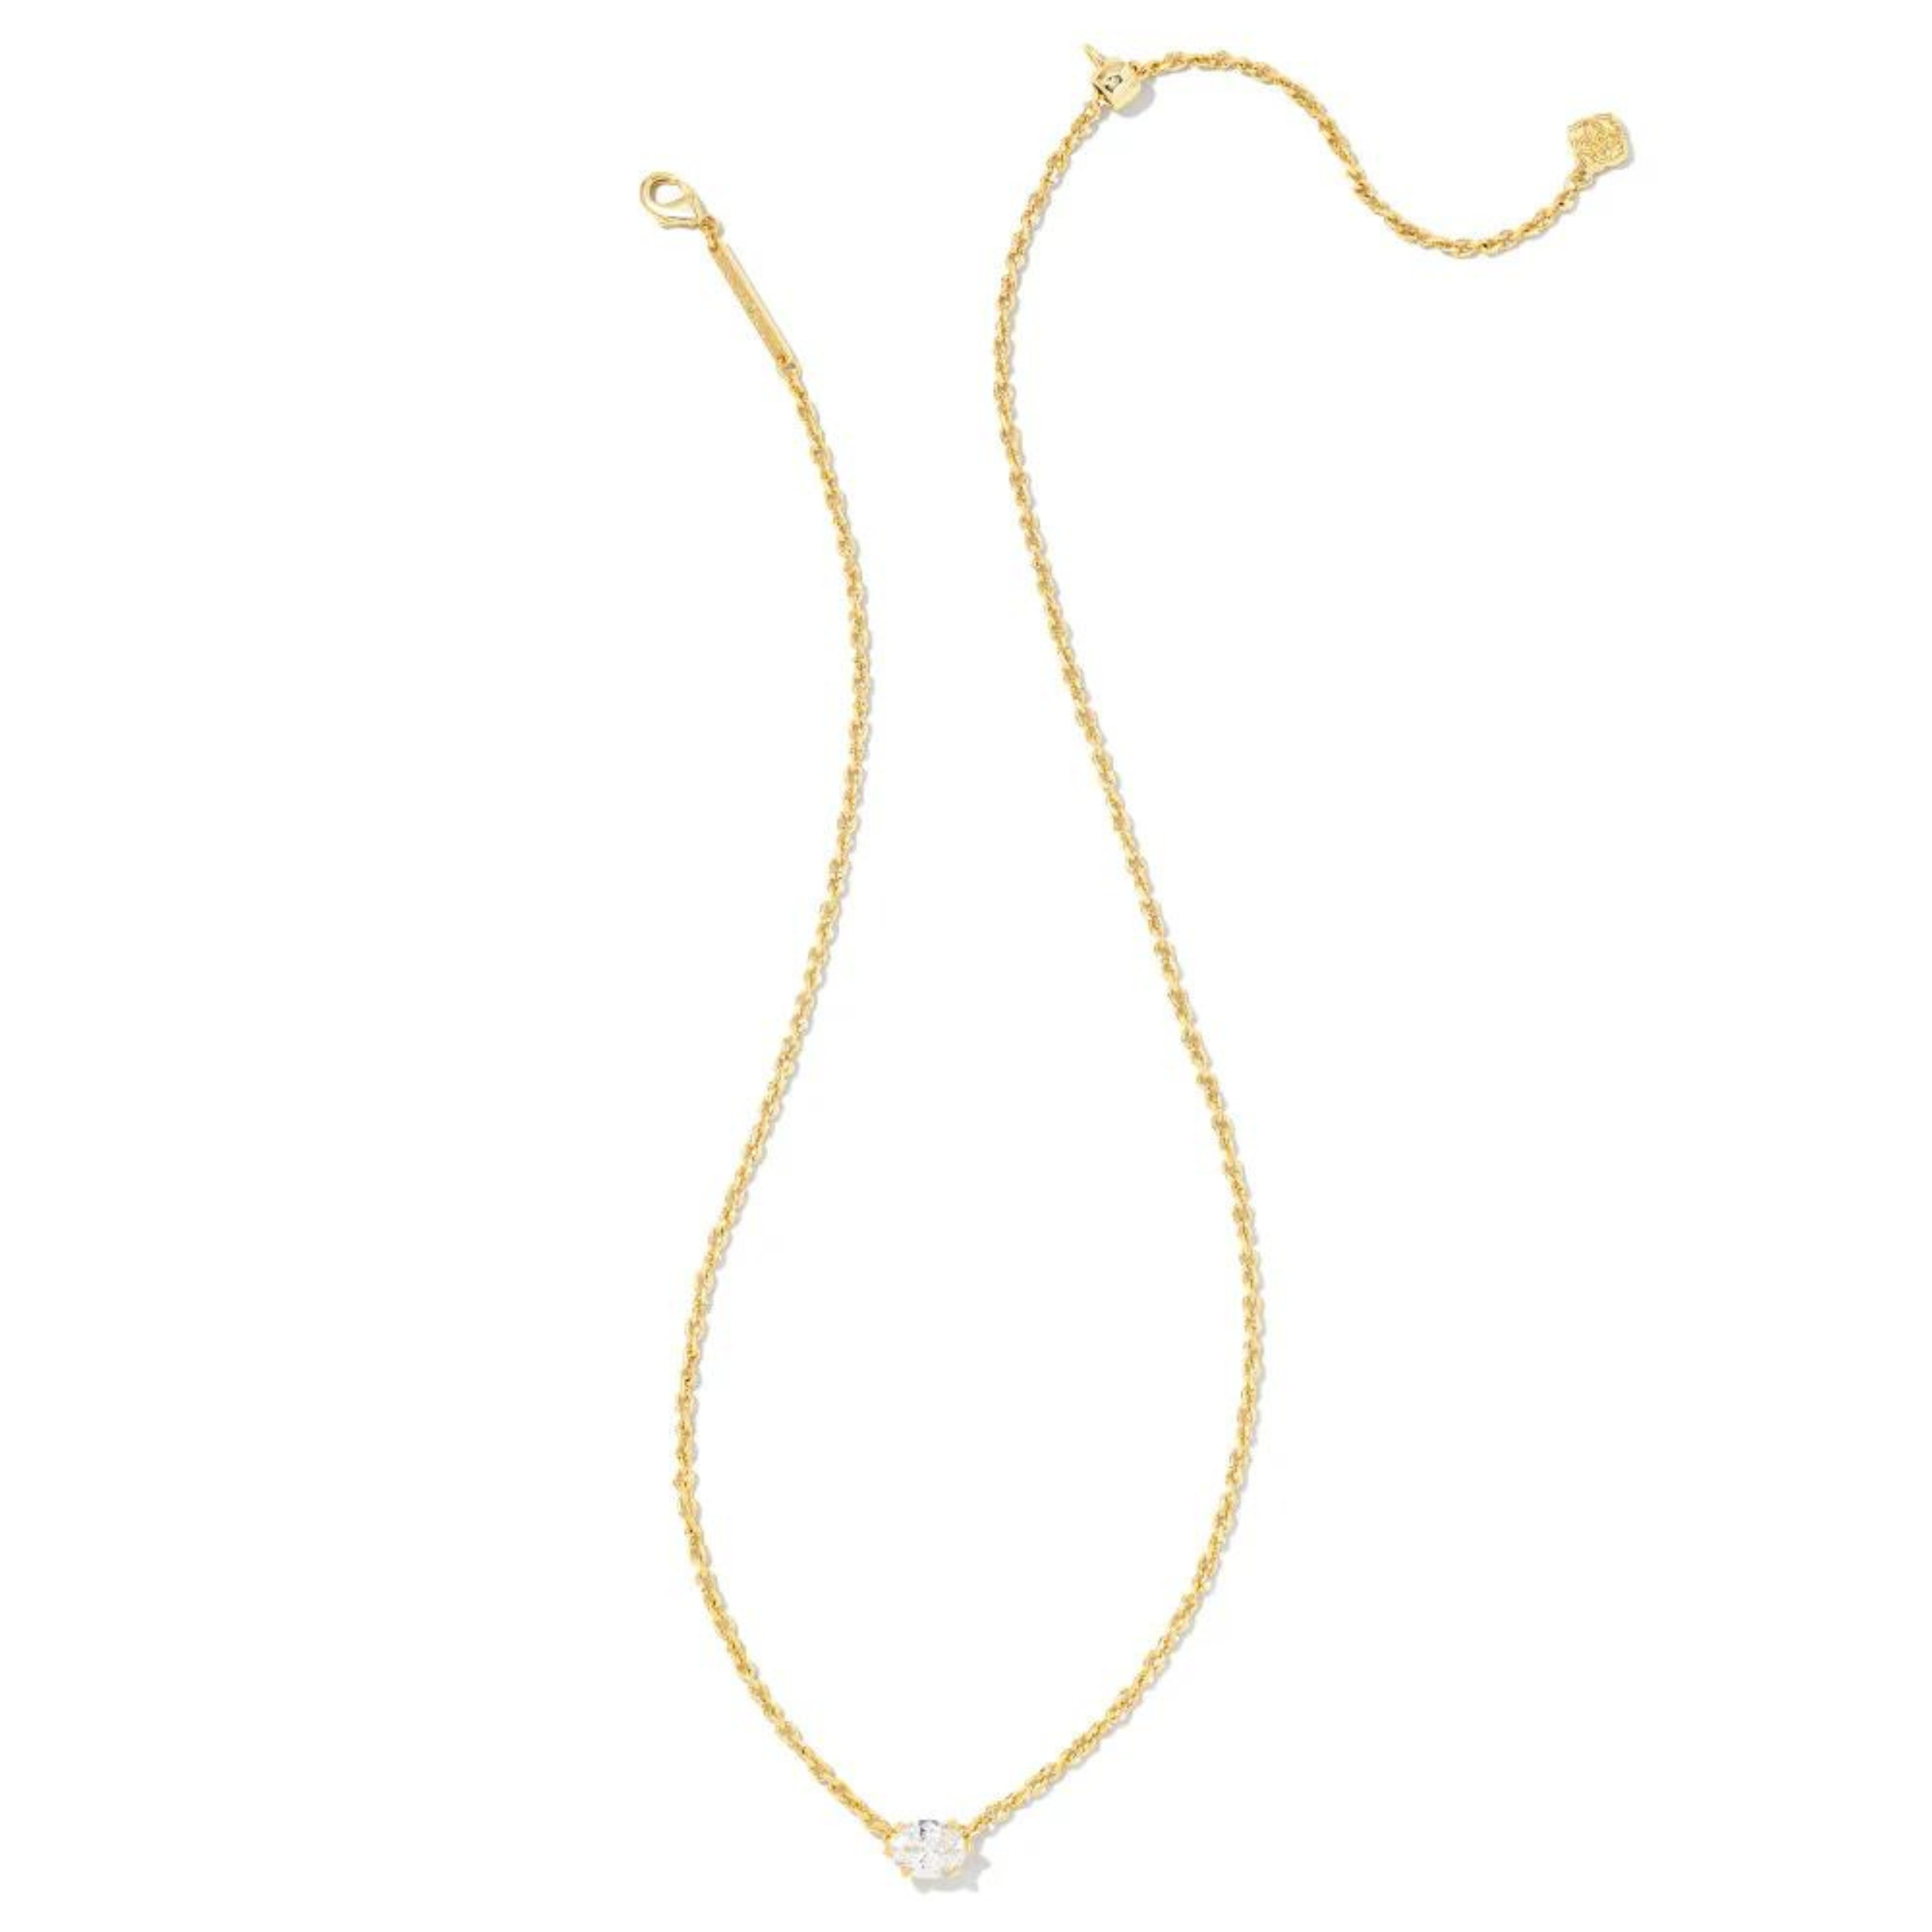 Kendra Scott | Cailin Gold Pendant Necklace in White Crystal - Giddy Up Glamour Boutique